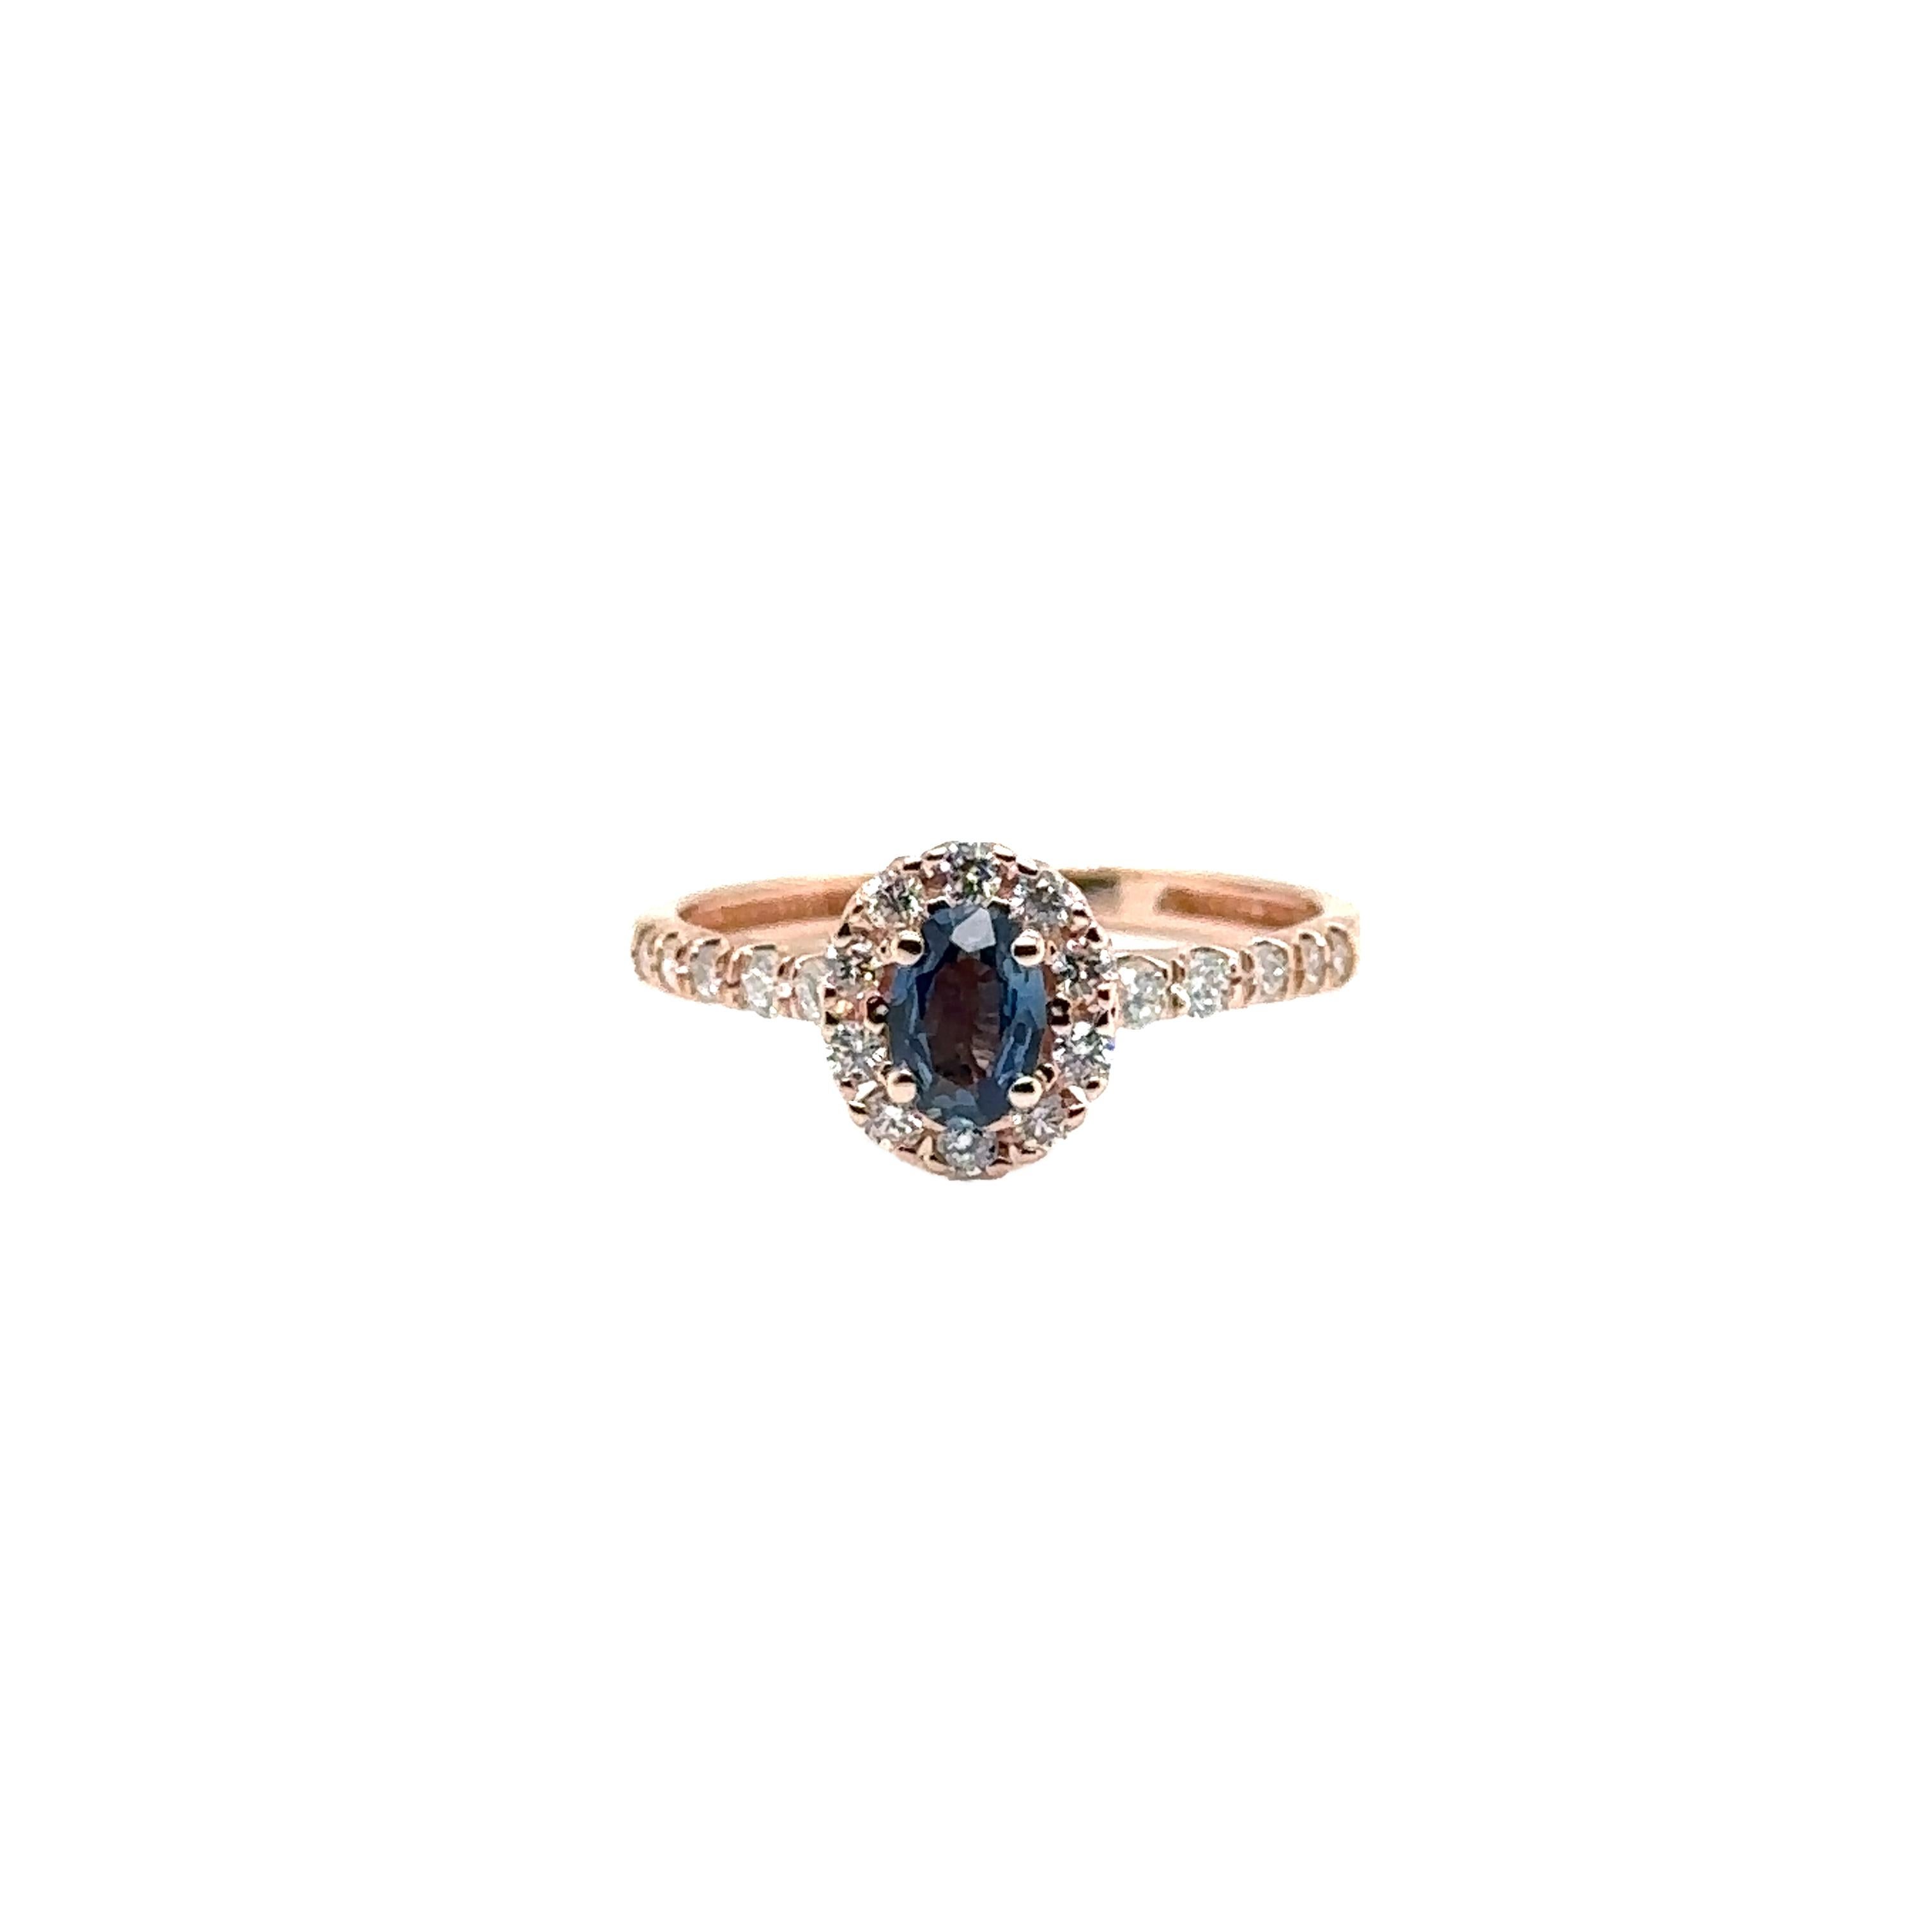 JAS-21-2235 - 14K ROSE GOLD OVAL SAPPHIRE RING with DIAMONDS In New Condition For Sale In New York, NY